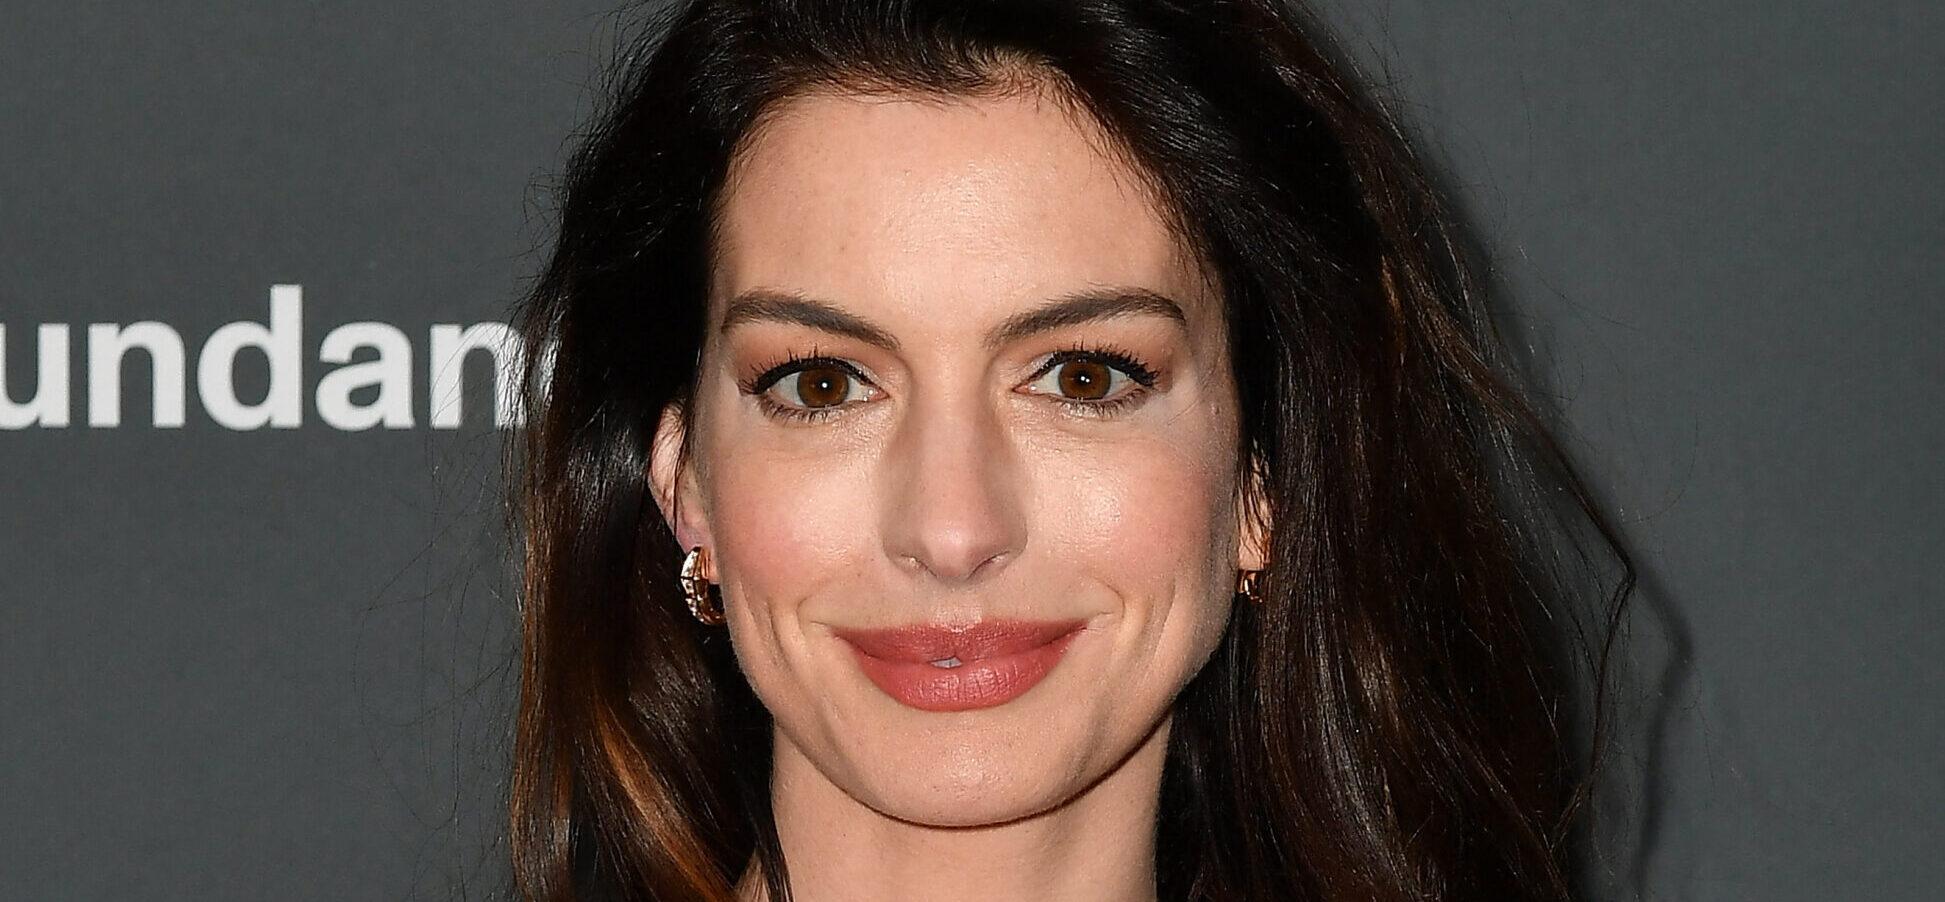 On Wednesdays, Anne Hathaway ‘Wears No Pants’: See The Steamy Photo!